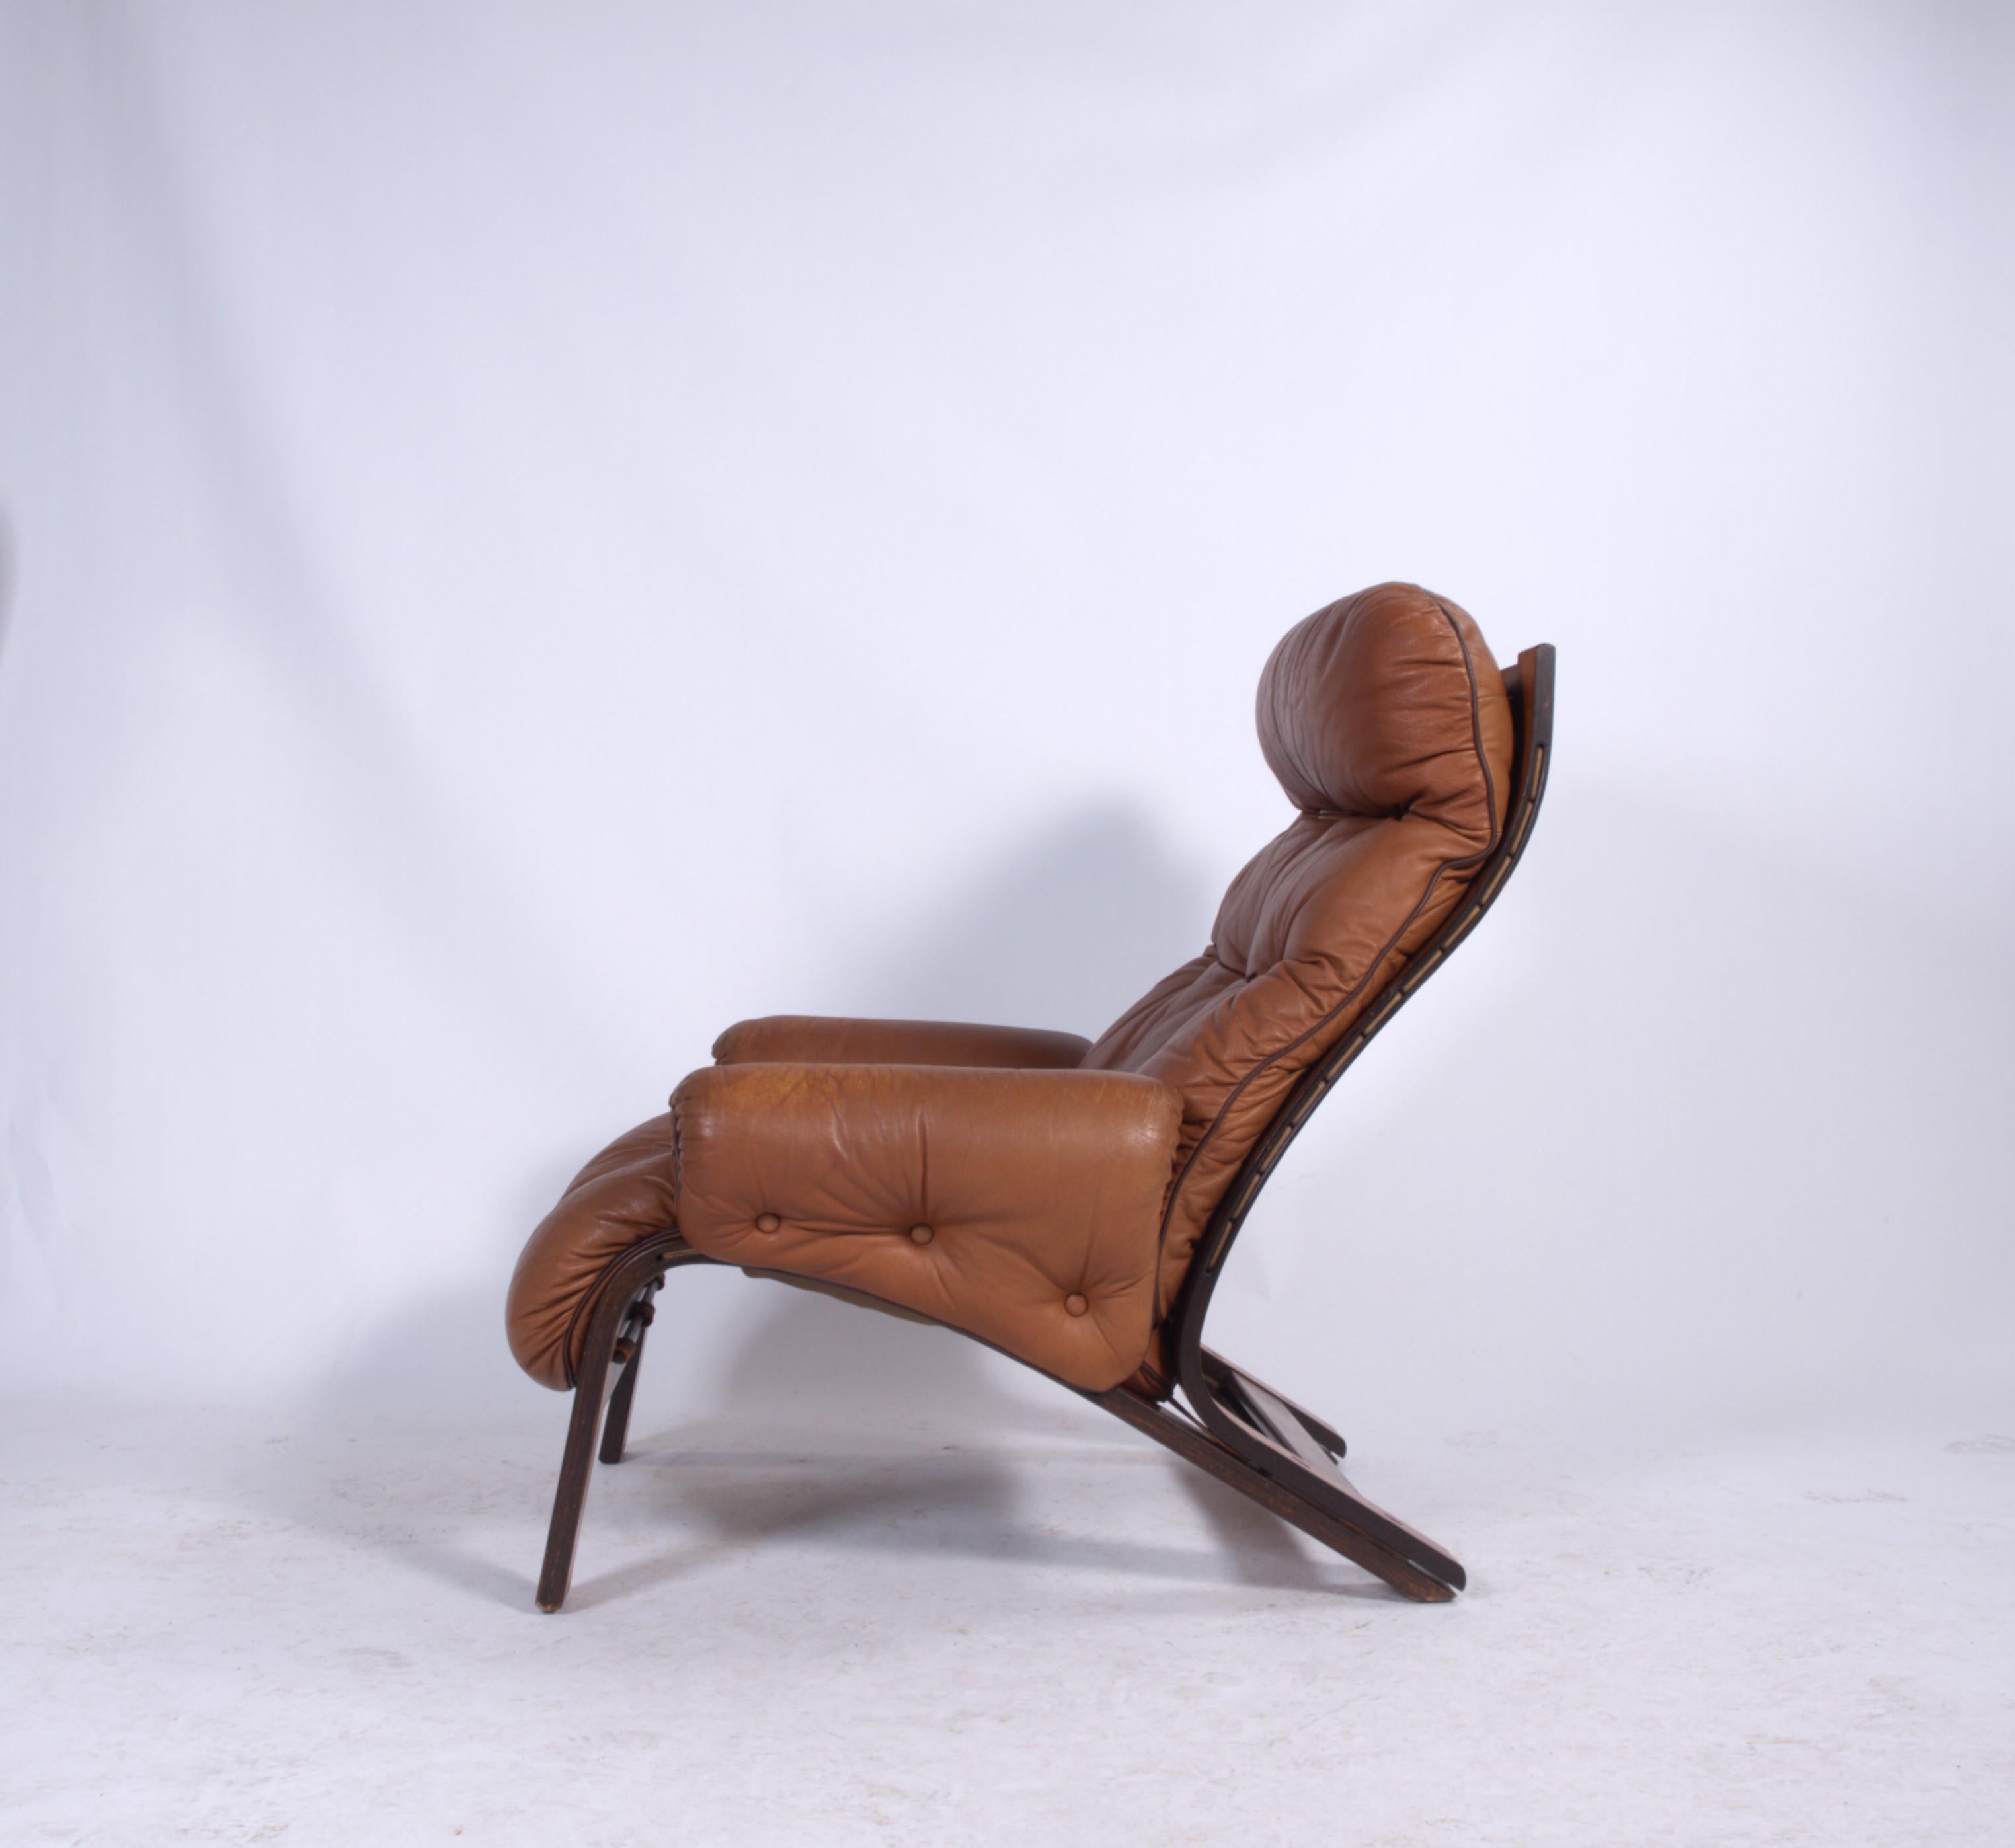 A very rare Sculptural organic shaped midcentury leather & jacaranda wood chair.
This design Classic dates from the 1960s & was produced by the leading Norwegian Midcentury design manufacturer Rybo Rykken & Co. It is designed by Elsa Solheim &